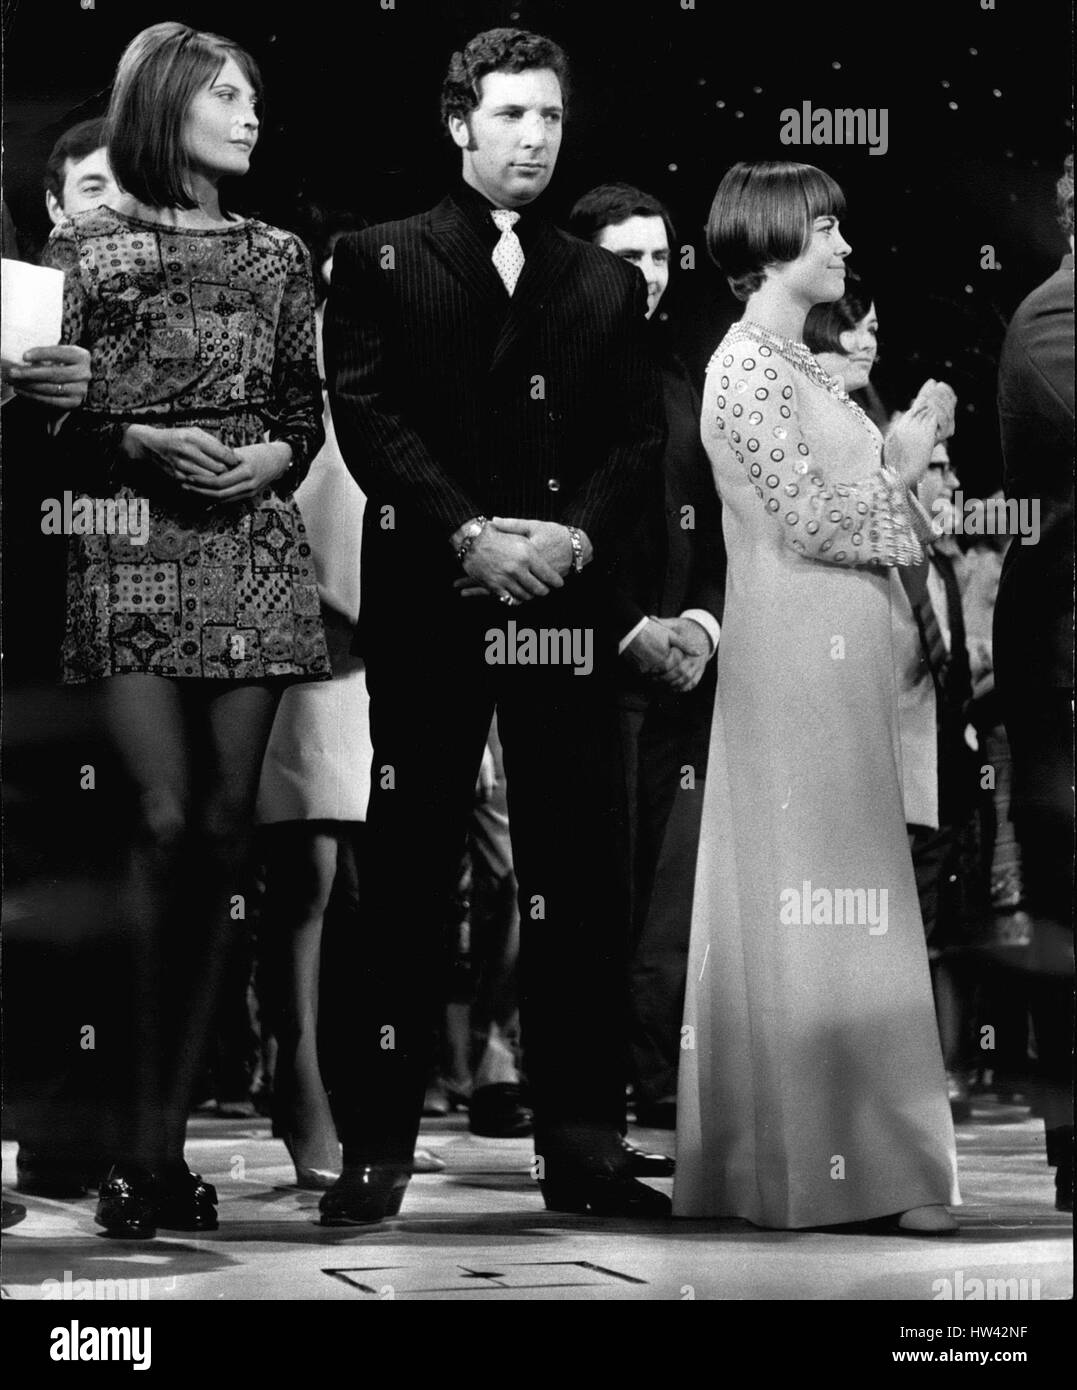 Nov. 11, 1967 - Final Rehearsal for Tonight's Royal Variety Performance at the London Palladium. Photo Shows: On the stage for the grand finale rehearsal at the London Palladium today are (L. to R.) Sandy Shaw, Tom Jones, two of Britain's pop stars, and French star, Mireille Mathieu, described as a new ''Edith Piaf' (Credit Image: © Keystone Press Agency/Keystone USA via ZUMAPRESS.com) Stock Photo